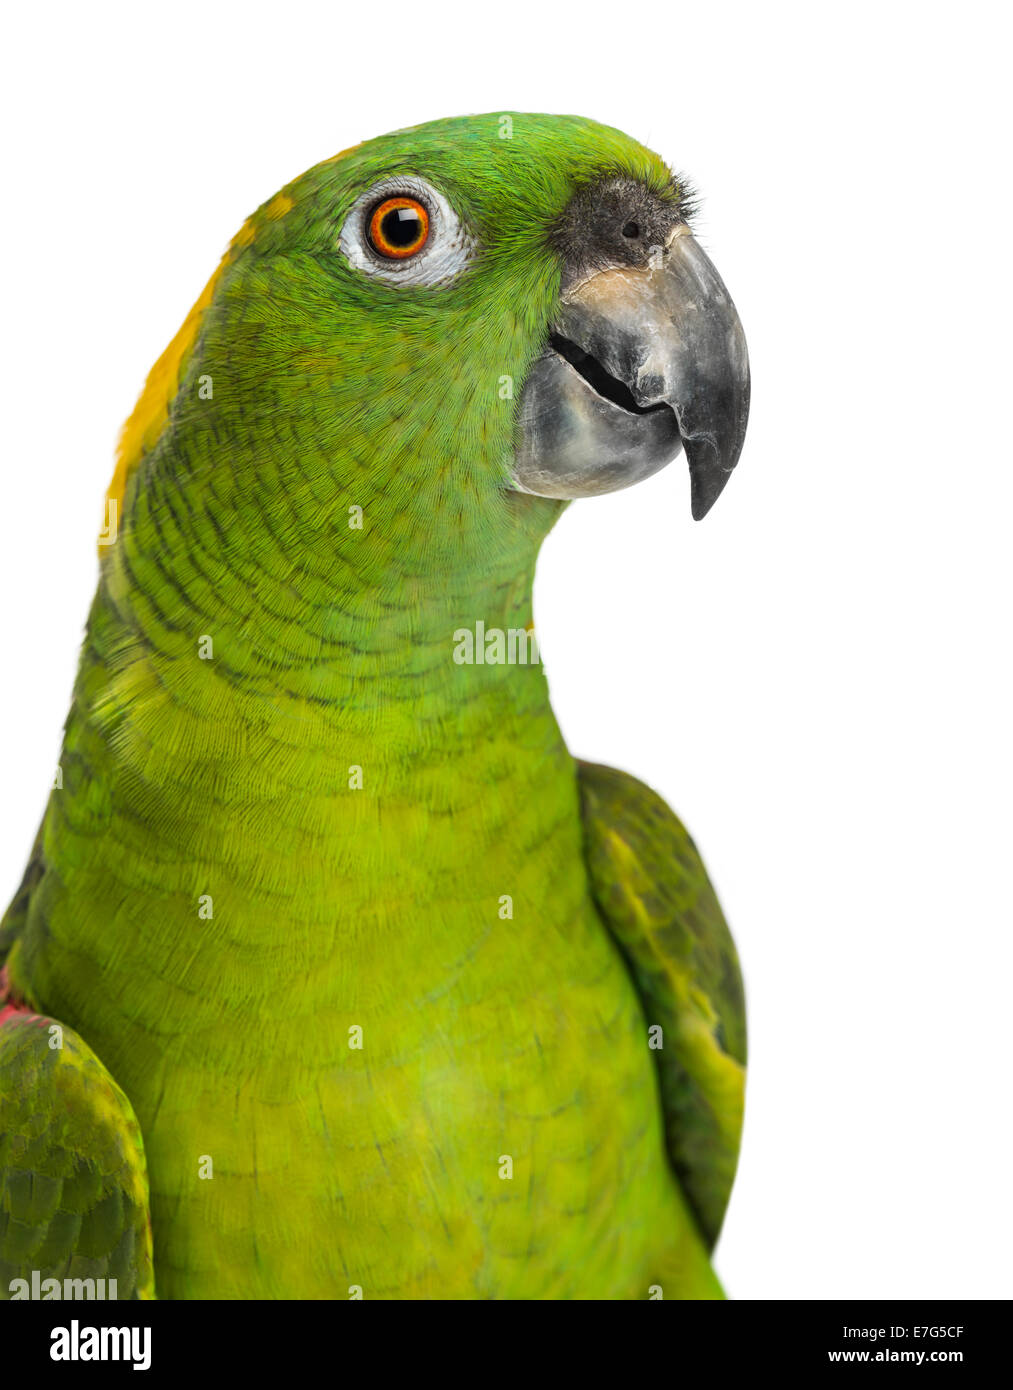 Headshot of a Yellow-naped parrot (6 years old), against white background Stock Photo